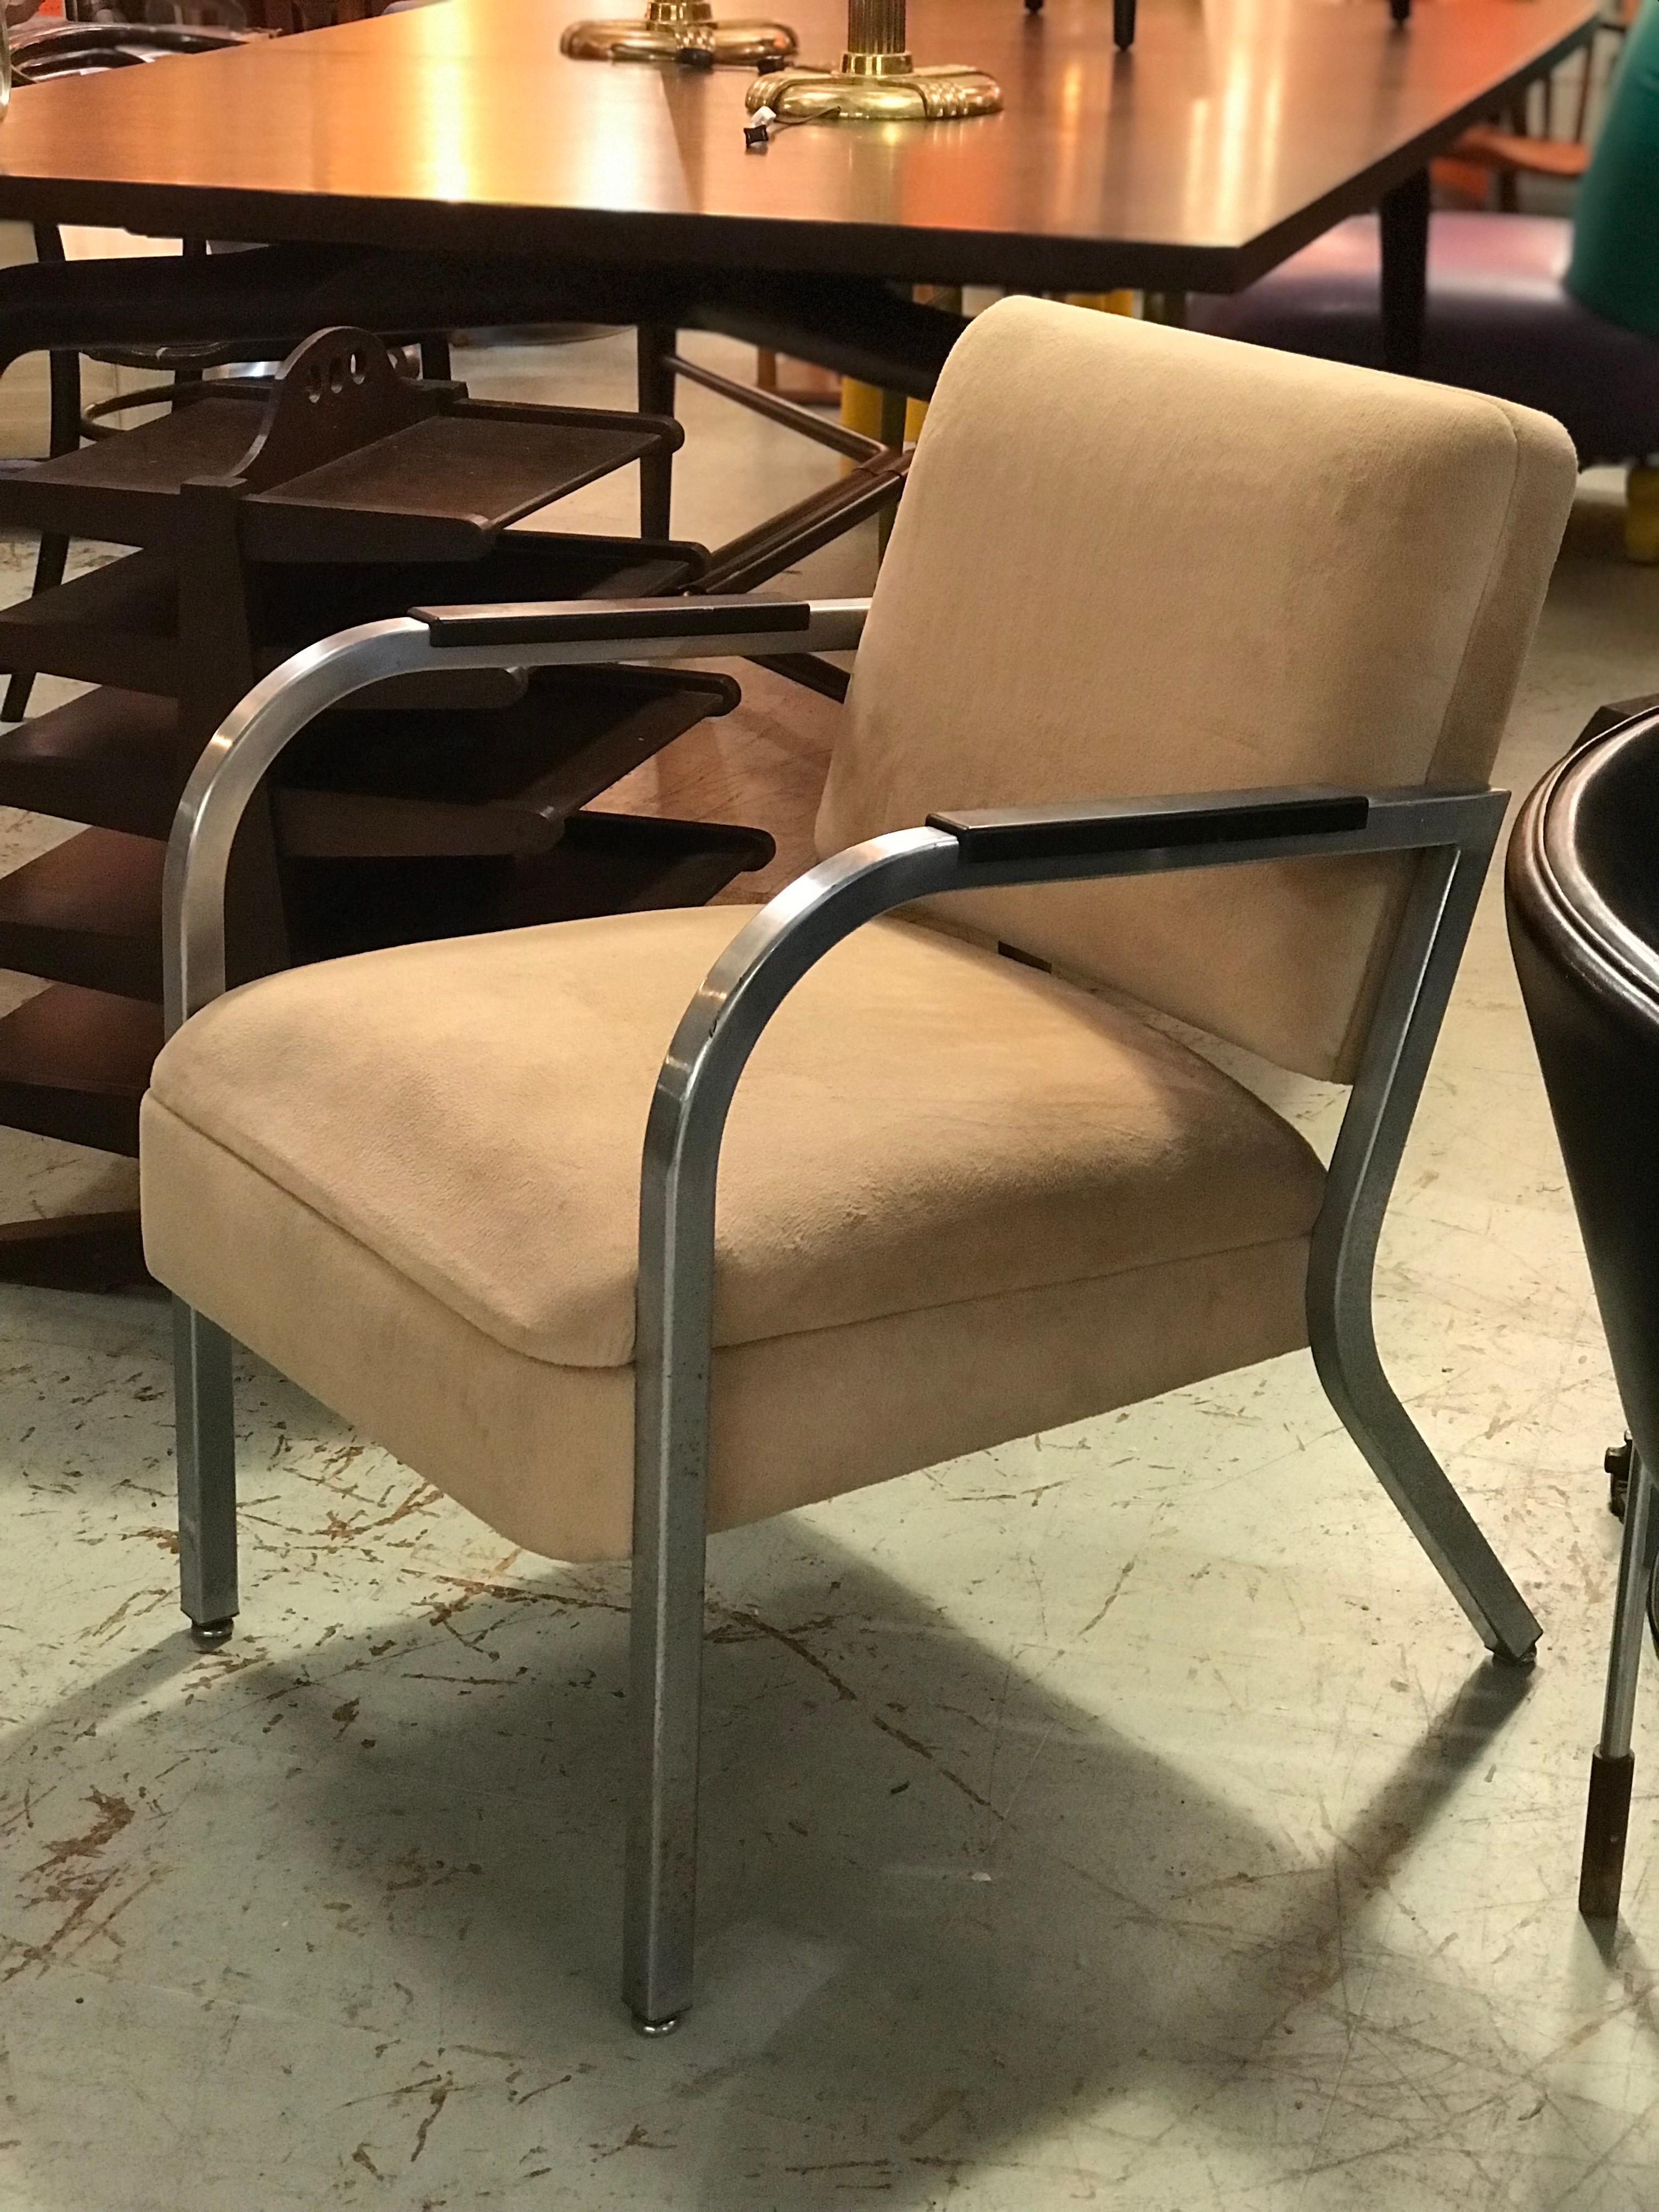 Steel A Pair of Petite Square Tubing 1960's Club Chairs IMO Shaw Walker or Goodform,  